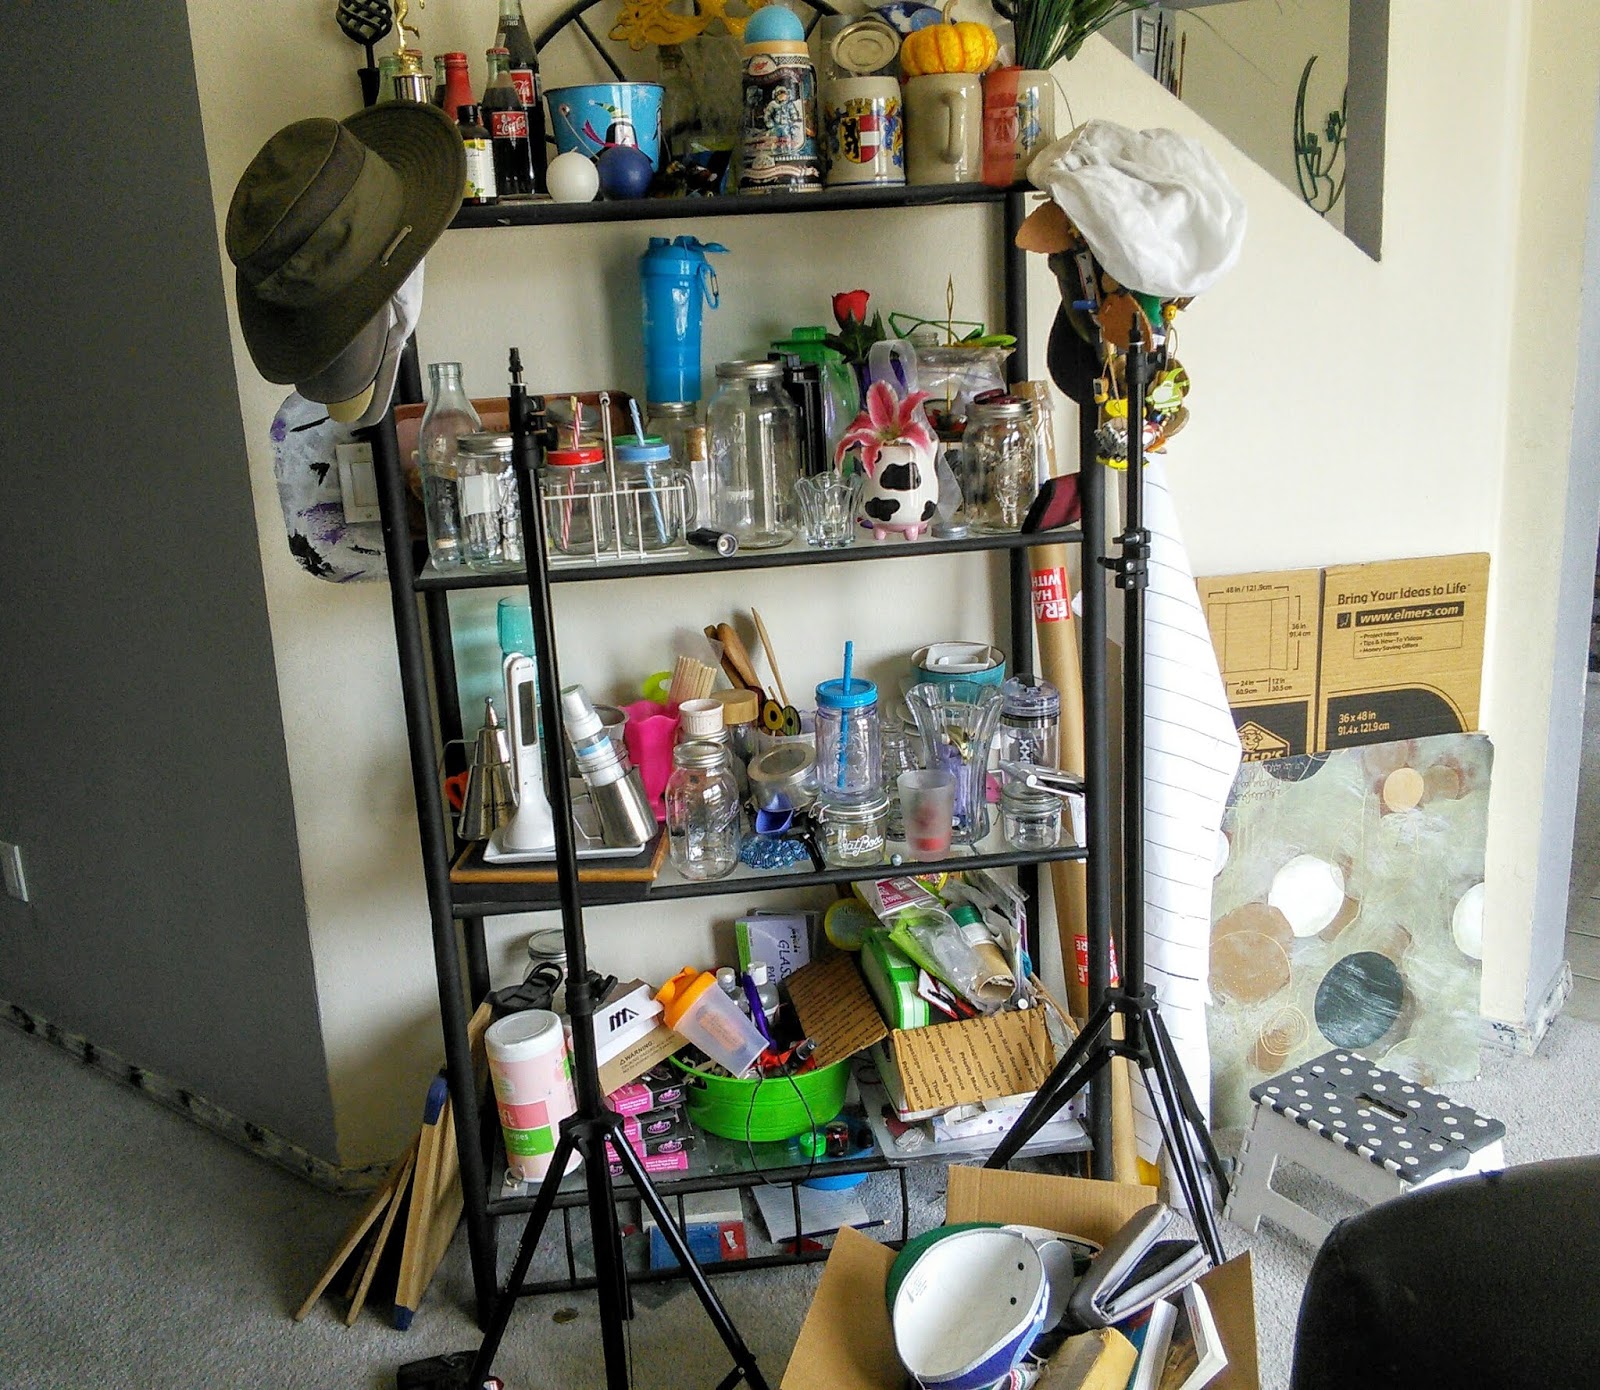 The transformation of a messy office to a photo studio!